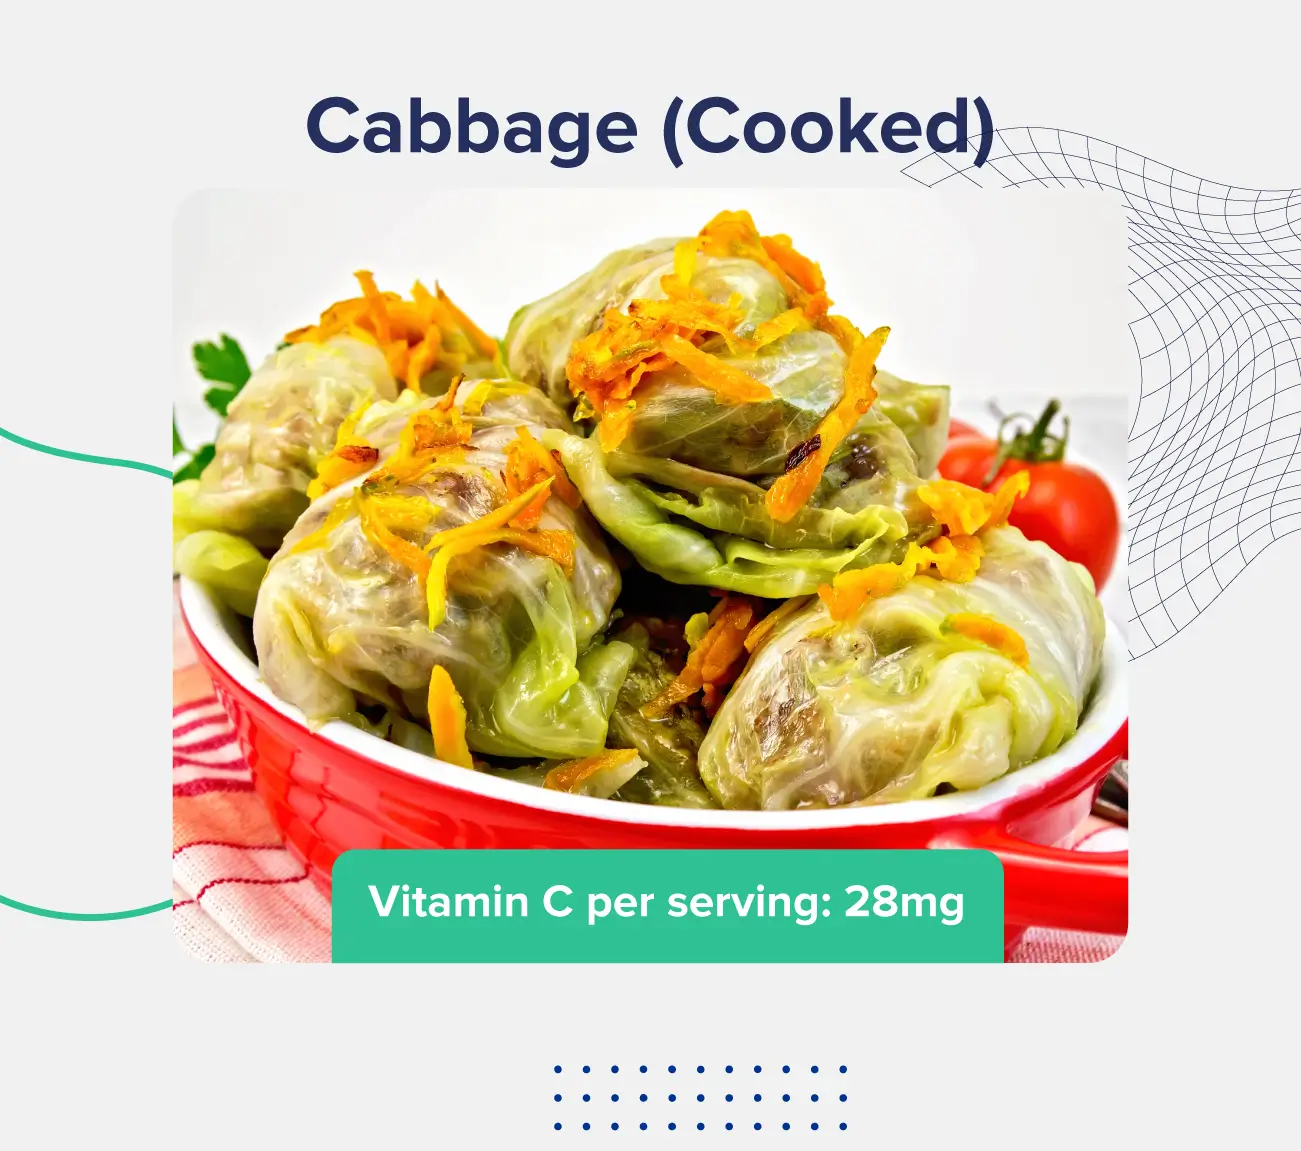 A graphic entitled "cabbage (cooked)" depicting a plate of cooked cabbage and a description of the vitamin C content (28 milligrams per serving)